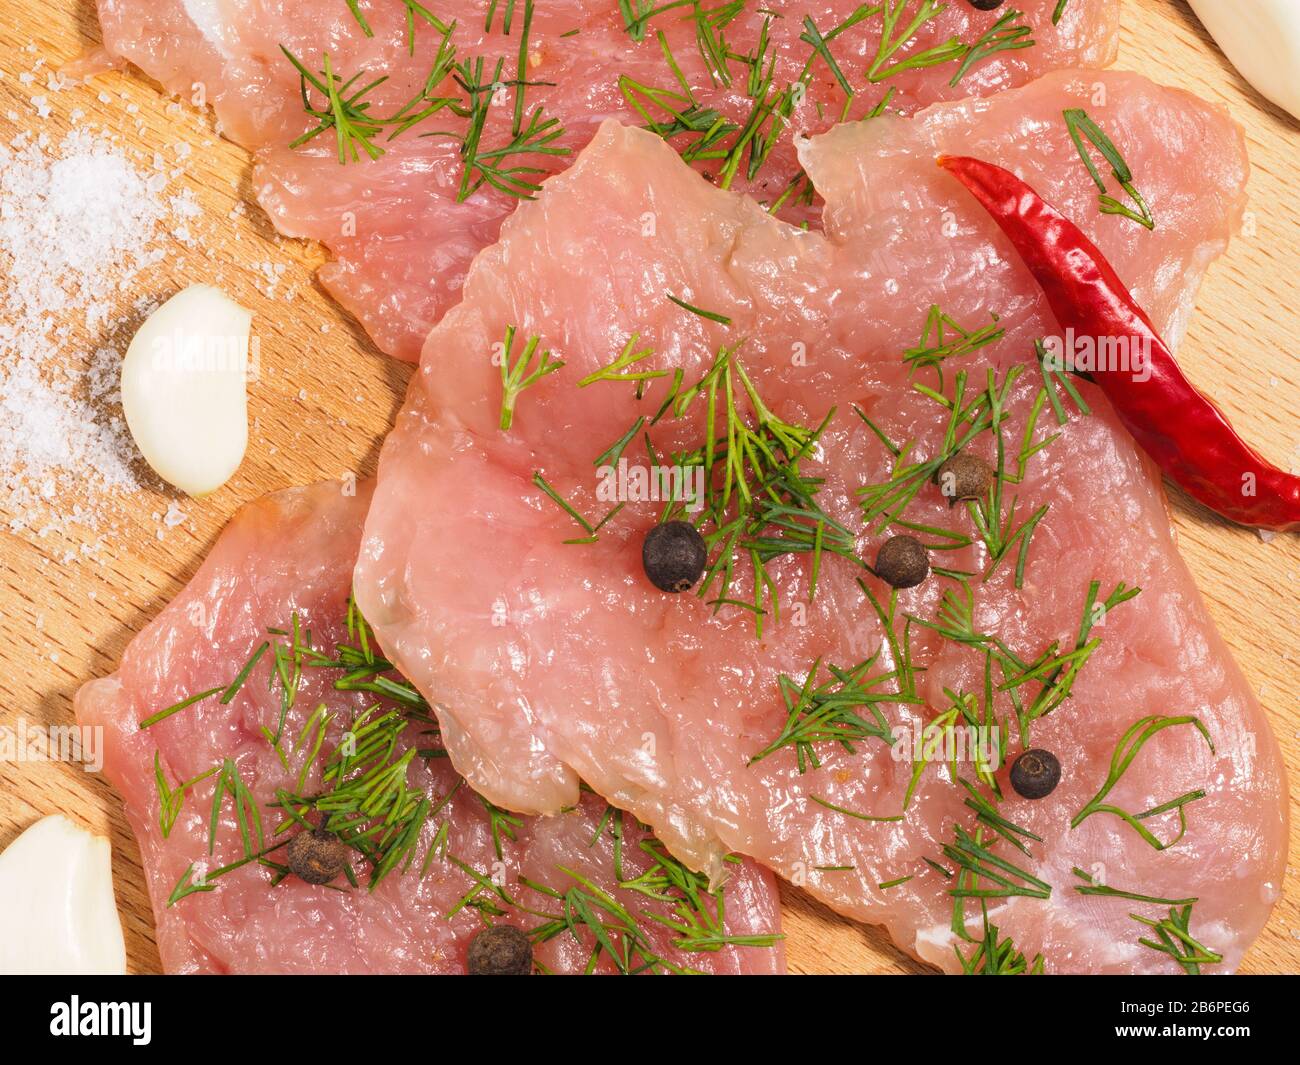 Sliced pieces of meat turkey game filet, garlic, salt, fennel, red chili pepper, allspice on wooden cutting board. Healthy eating concept. Macro photo Stock Photo